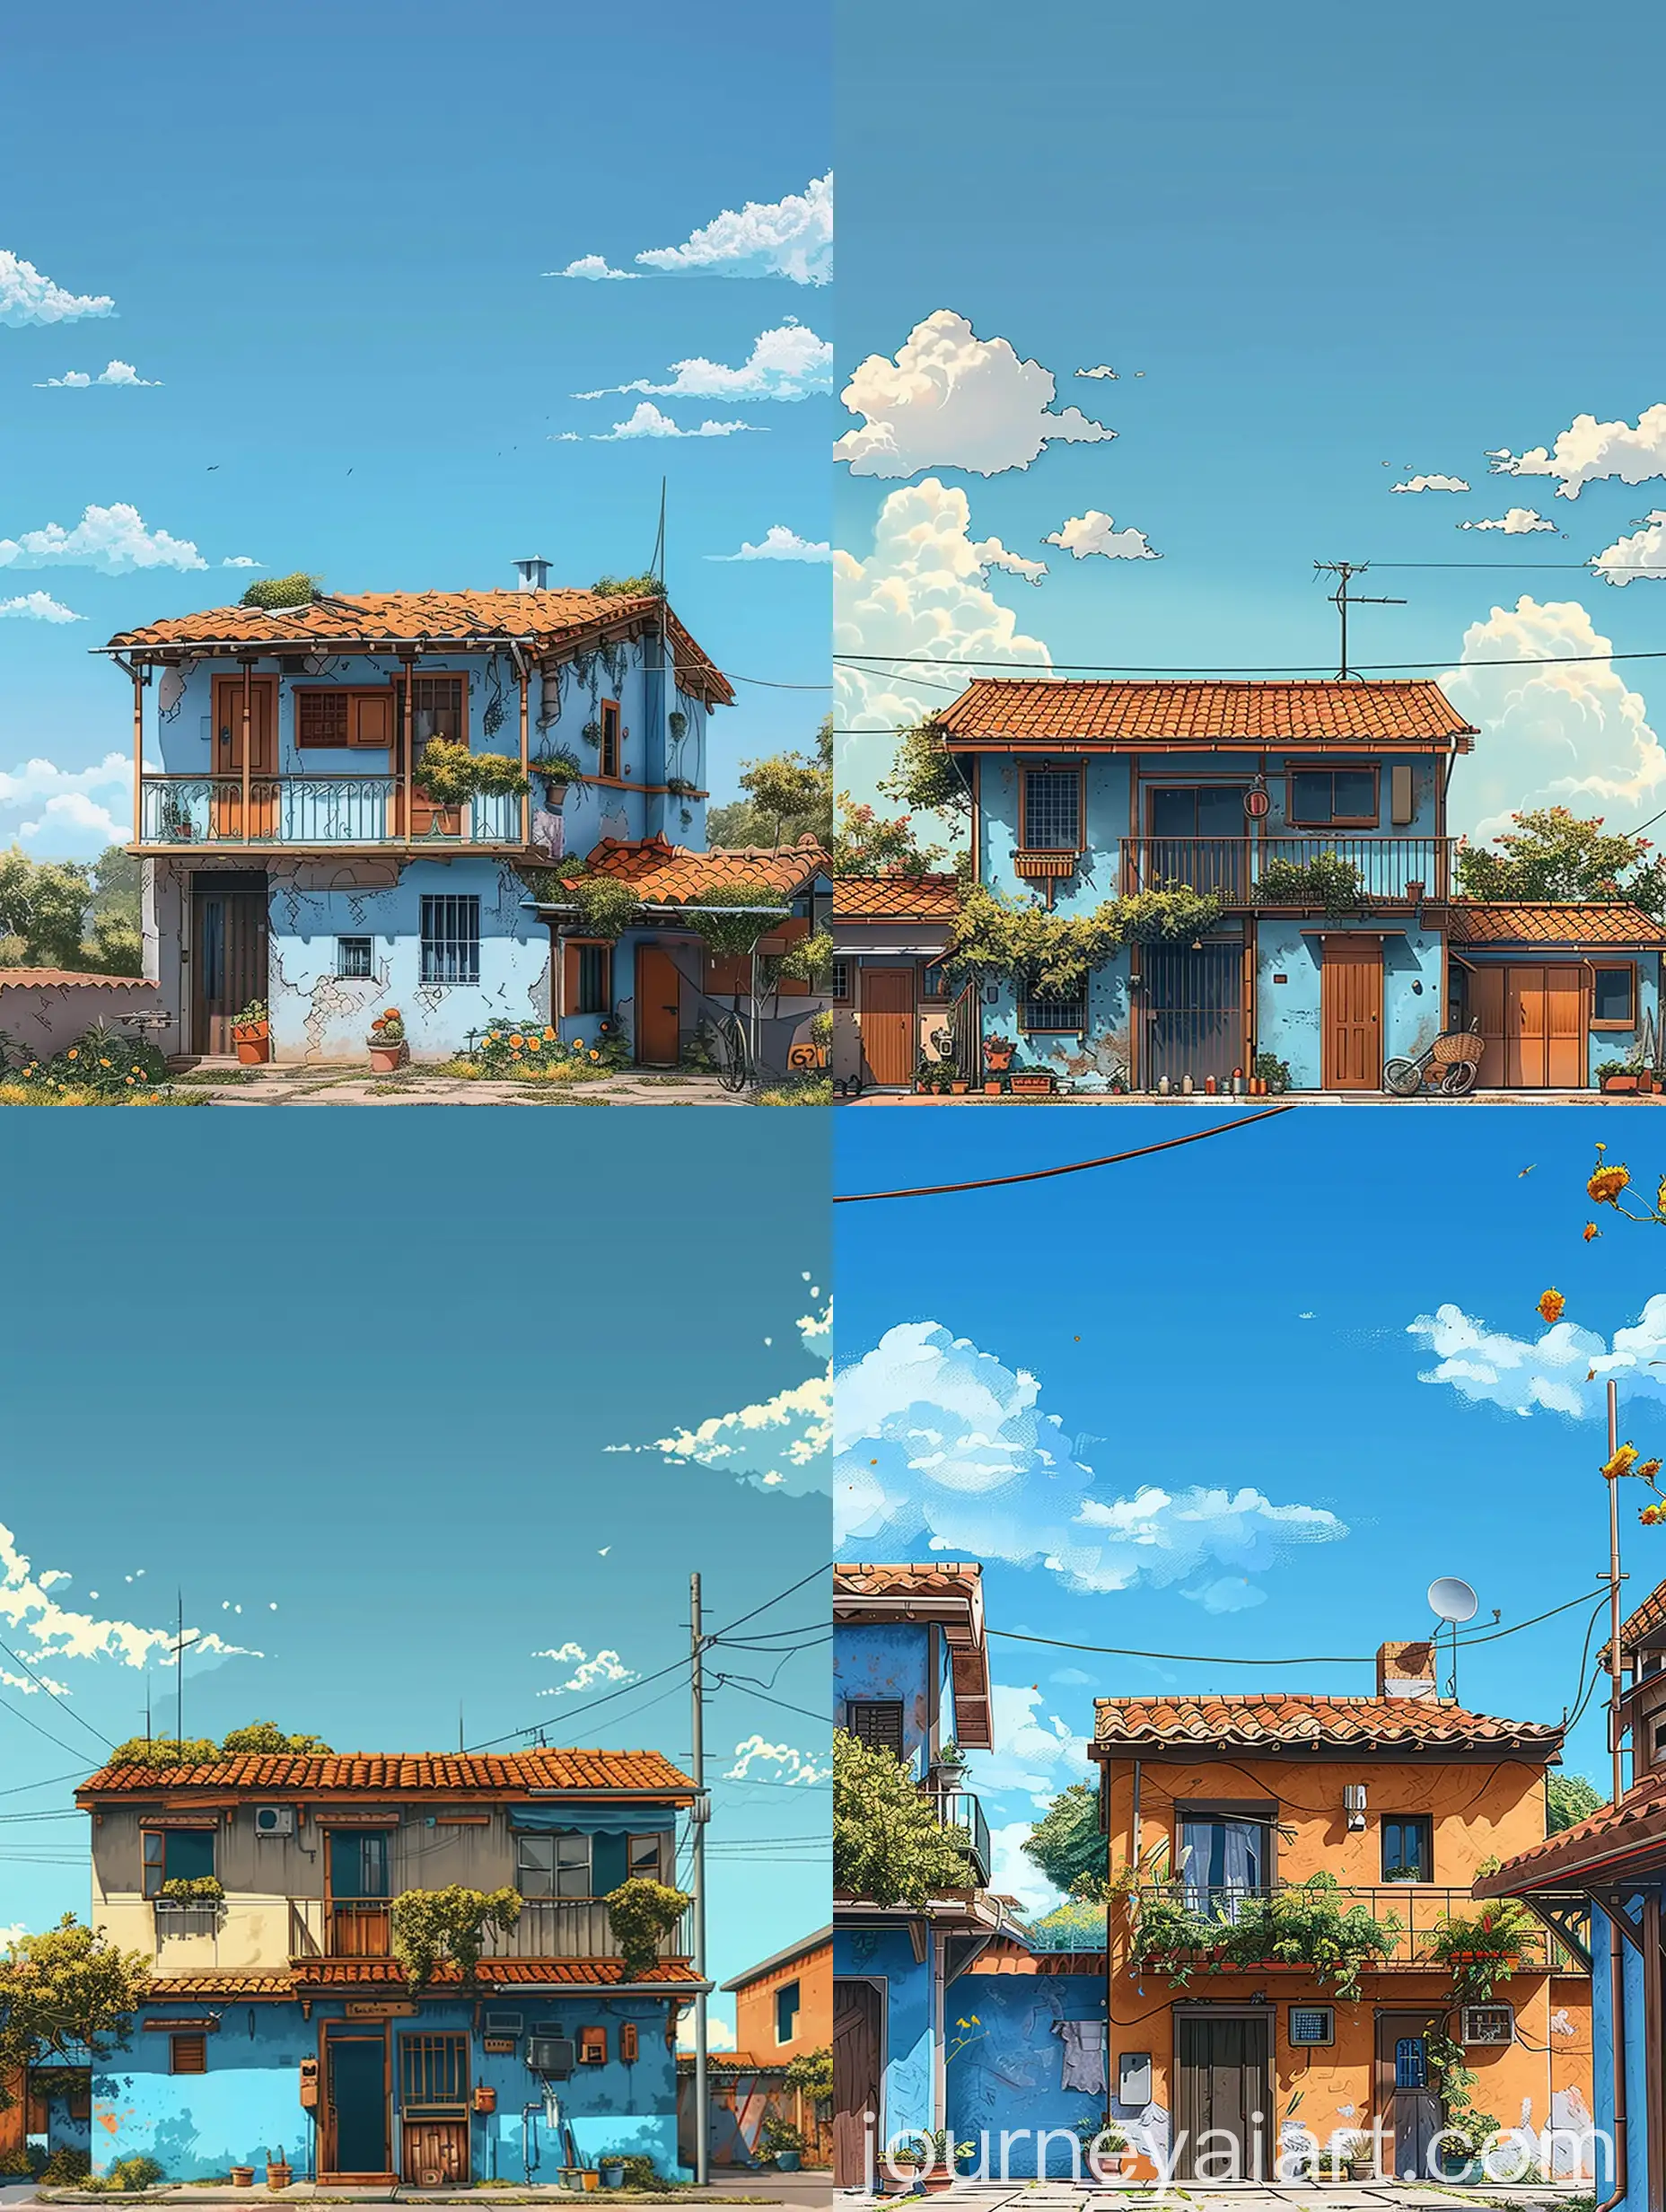 Digital-Art-of-a-Tranquil-Village-House-with-Clear-Day-Sky